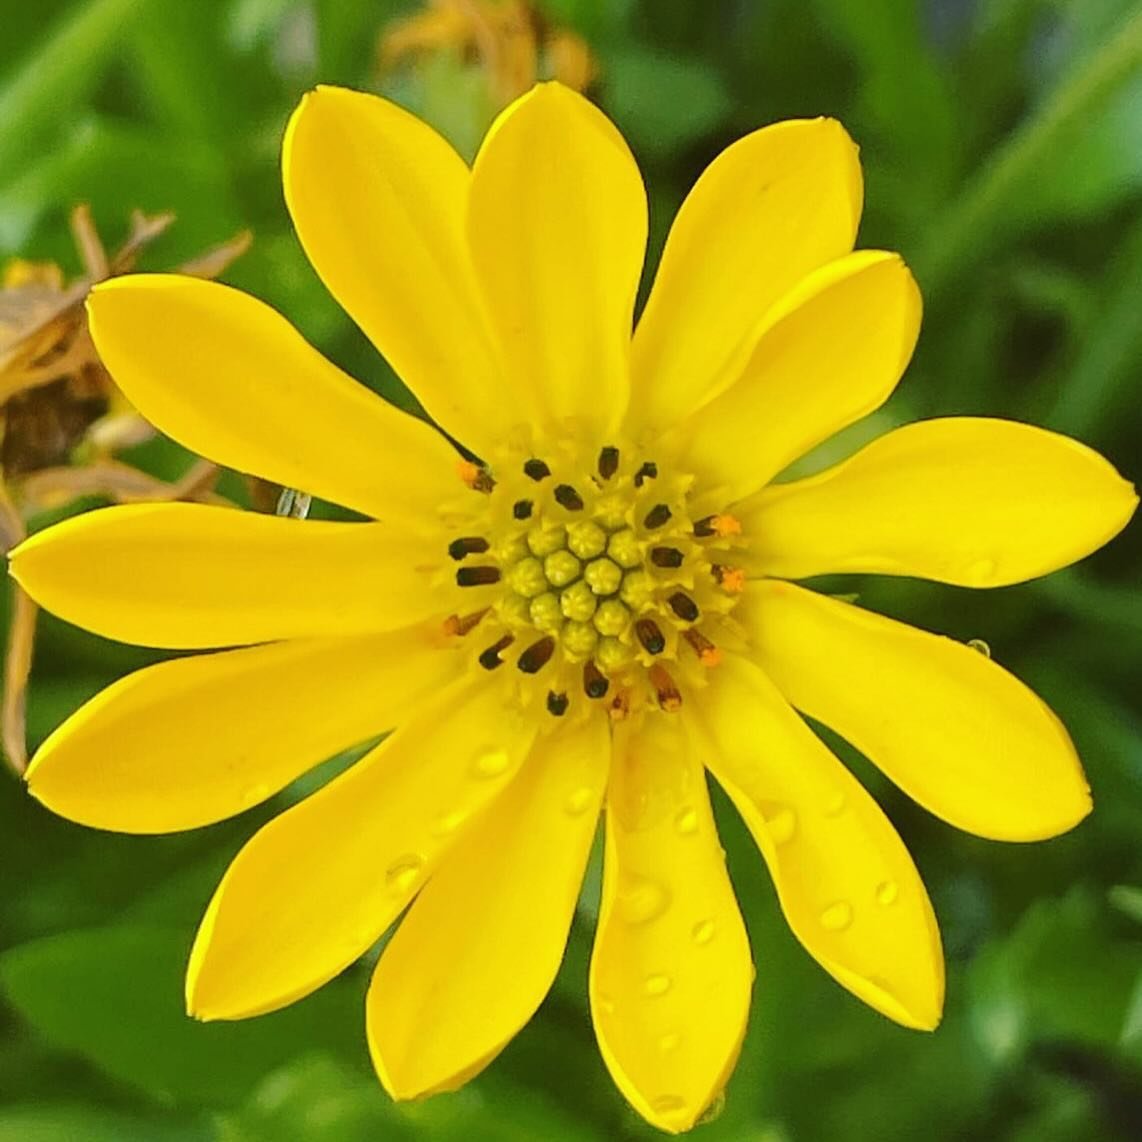 💛🔆💛Be the sunshine in someone&rsquo;s cloudy day! - Dr Christina 
.
.
.
#dr_christina #personalleadershipcoach #leadyourself #yellow #daisy #flowerstagram #beautiful #alive #agemazing #memories #grandparents #grandchildren #positivevibes #keepgoin